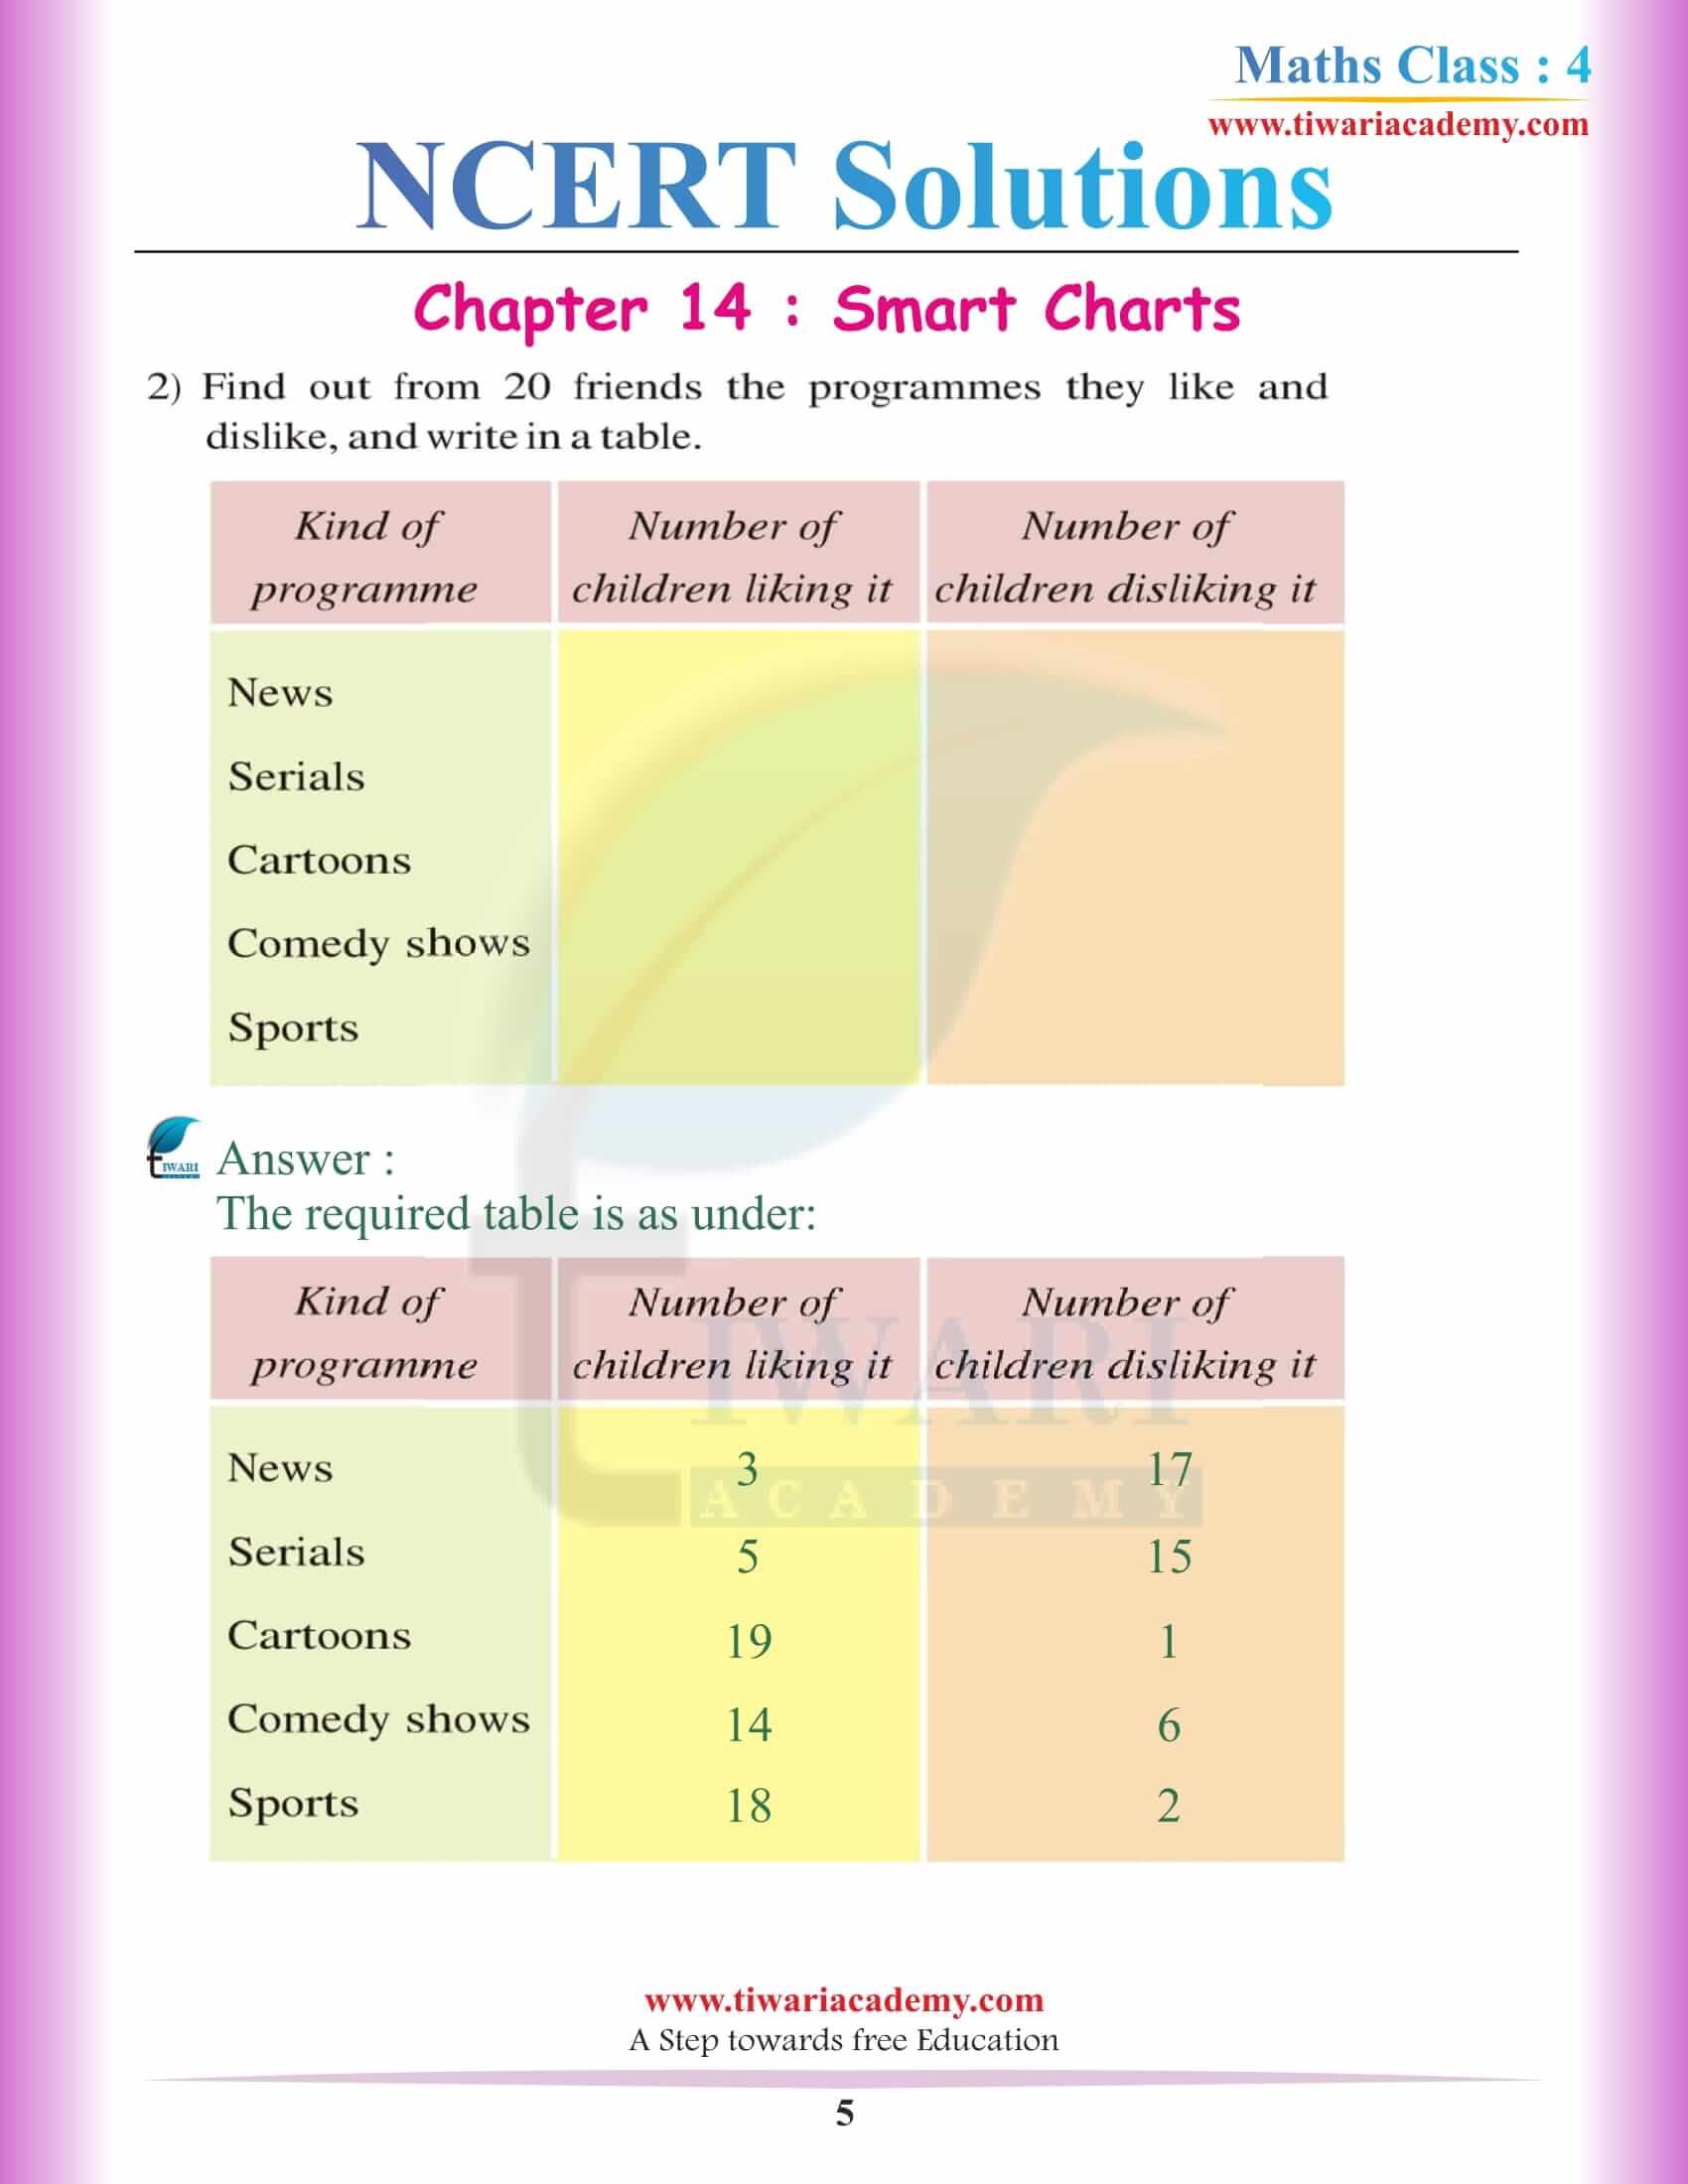 NCERT Solutions for Class 4 Maths Chapter 14 free download